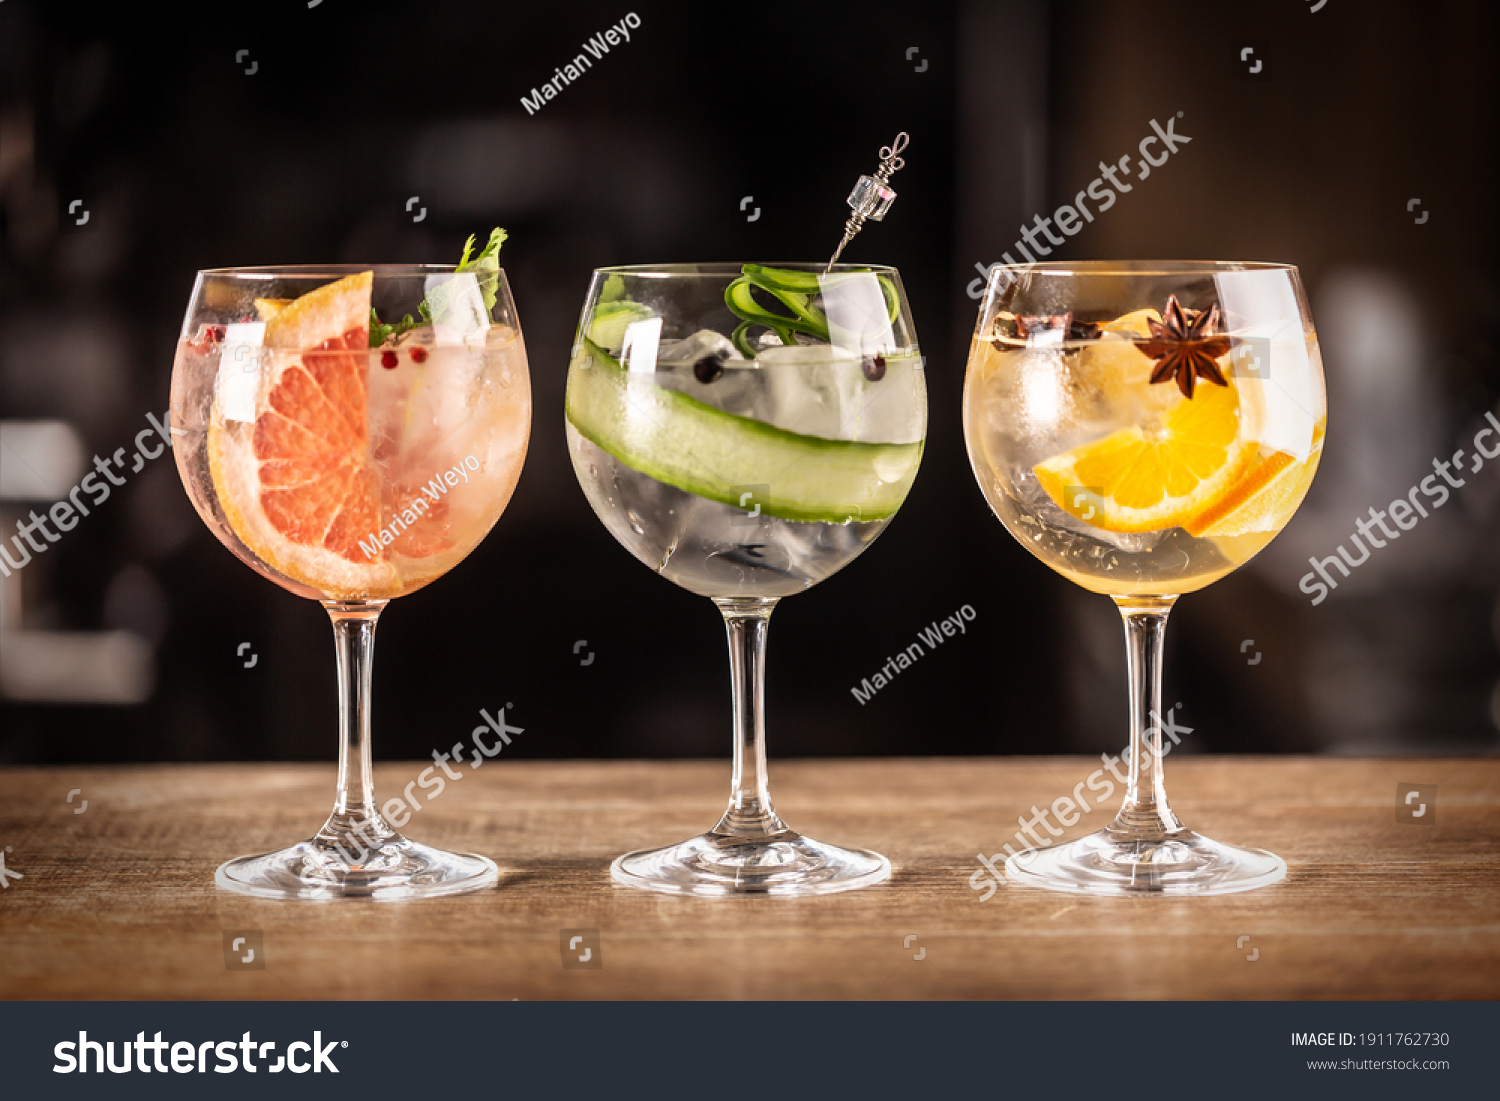 Gin tonic long drink as a classic cocktail in various forms with garnish in individual glasses such as orange, grapefruit, or cucumber. #1911762730